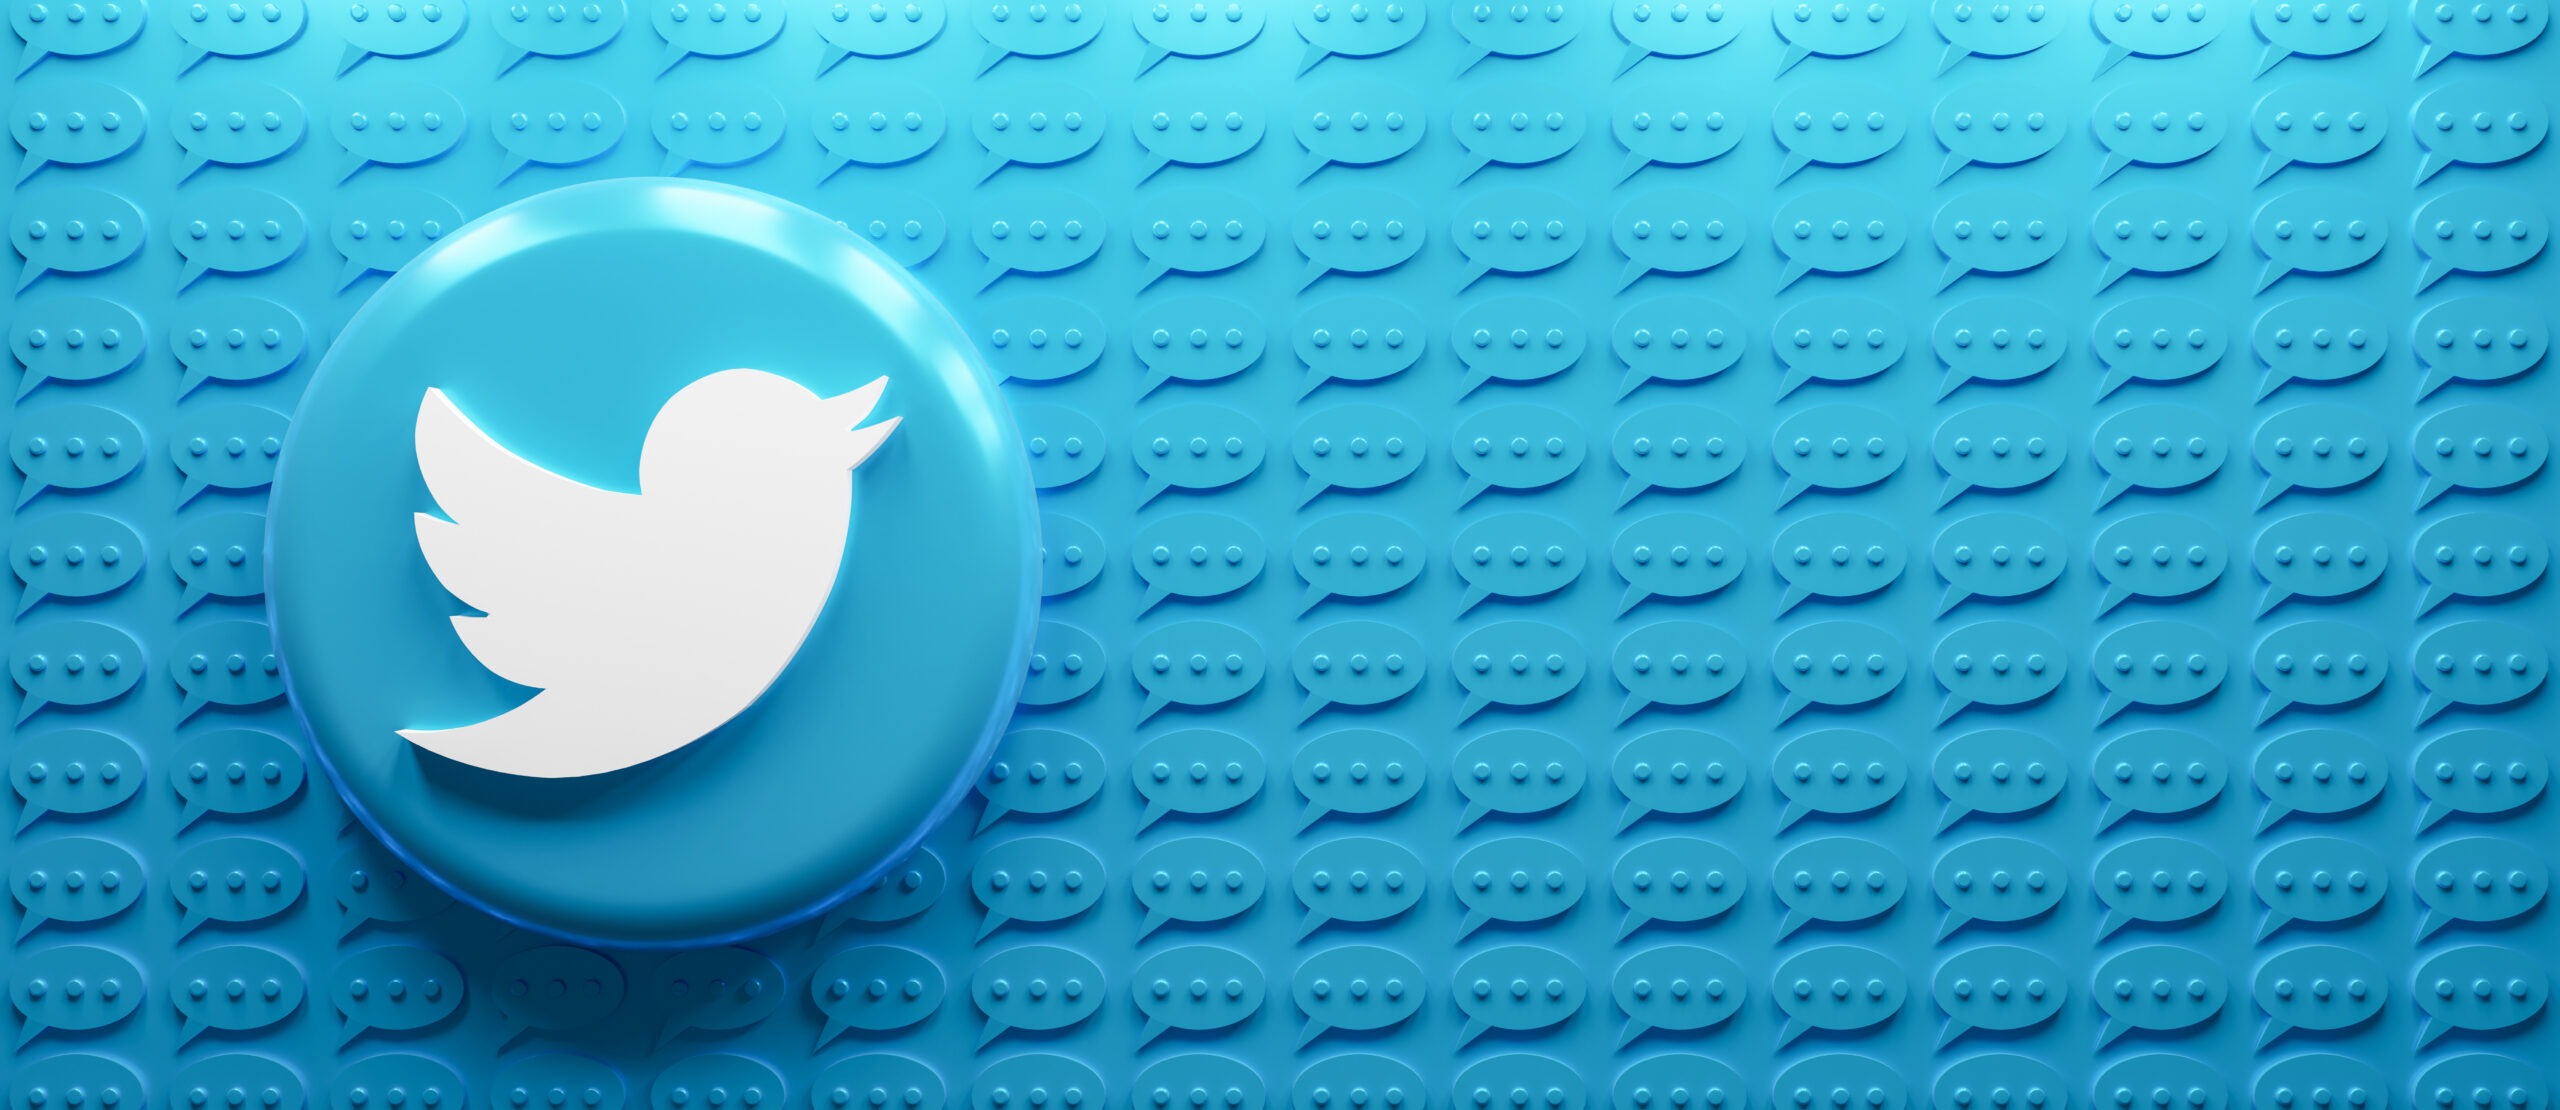 3D rending of Twitter logo with a the message symbol in blue spread all across the background